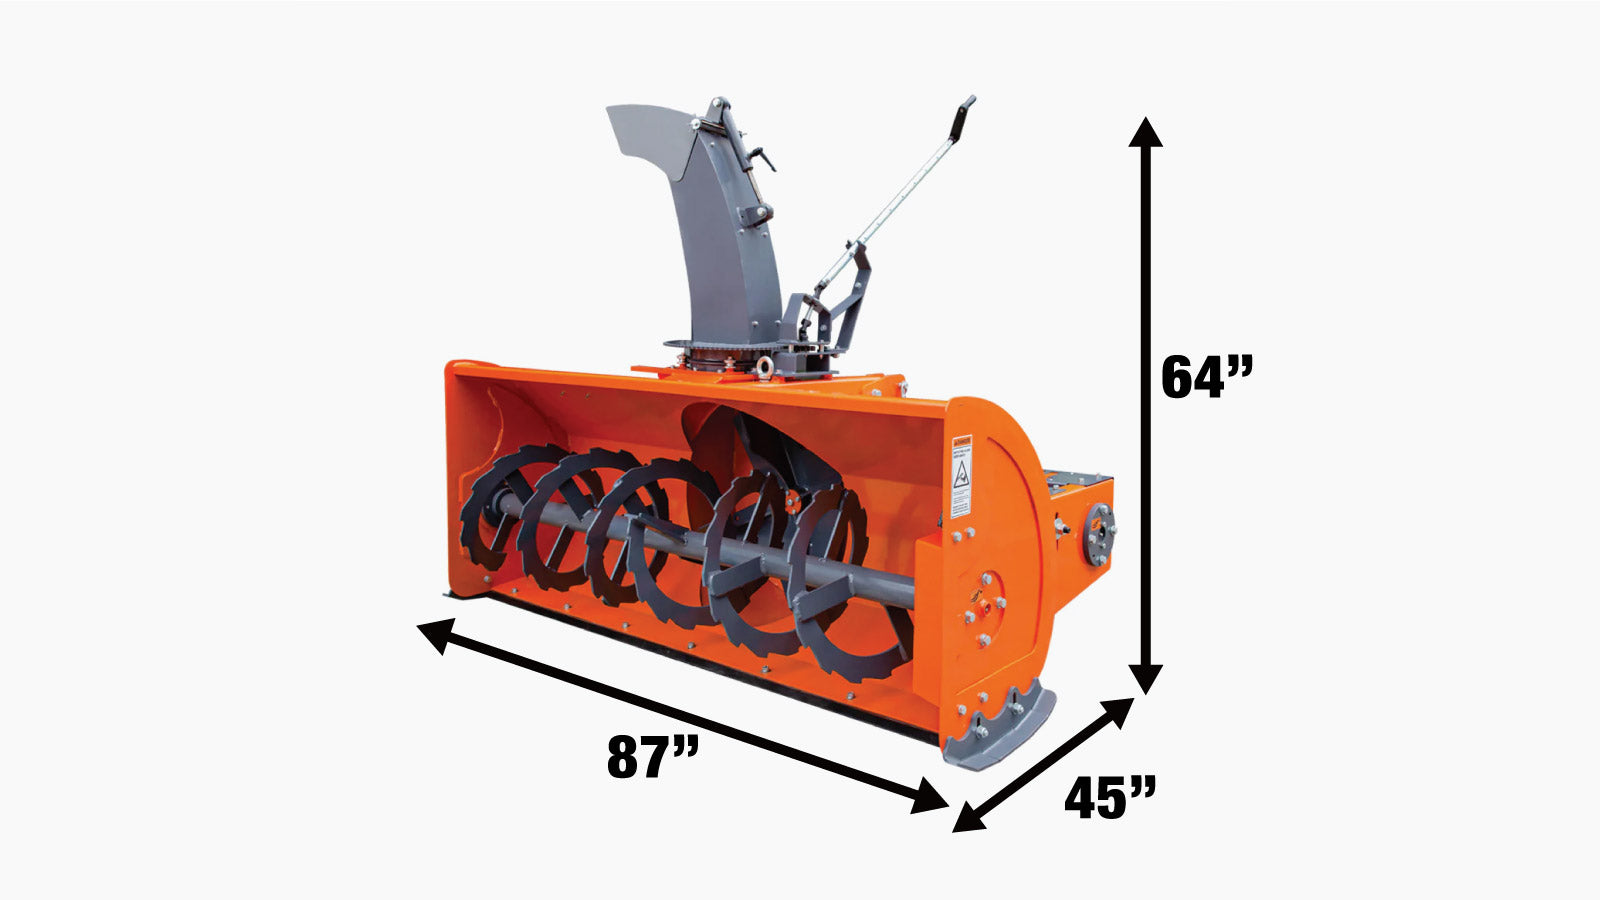 TMG Industrial 84” 3-Point Hitch Snow Blower, 25-90 HP, 24” Diameter Impeller, 360° Snow Chute, CAT 1 & CAT 2 Suspension, TMG-TBS84-specifications-image